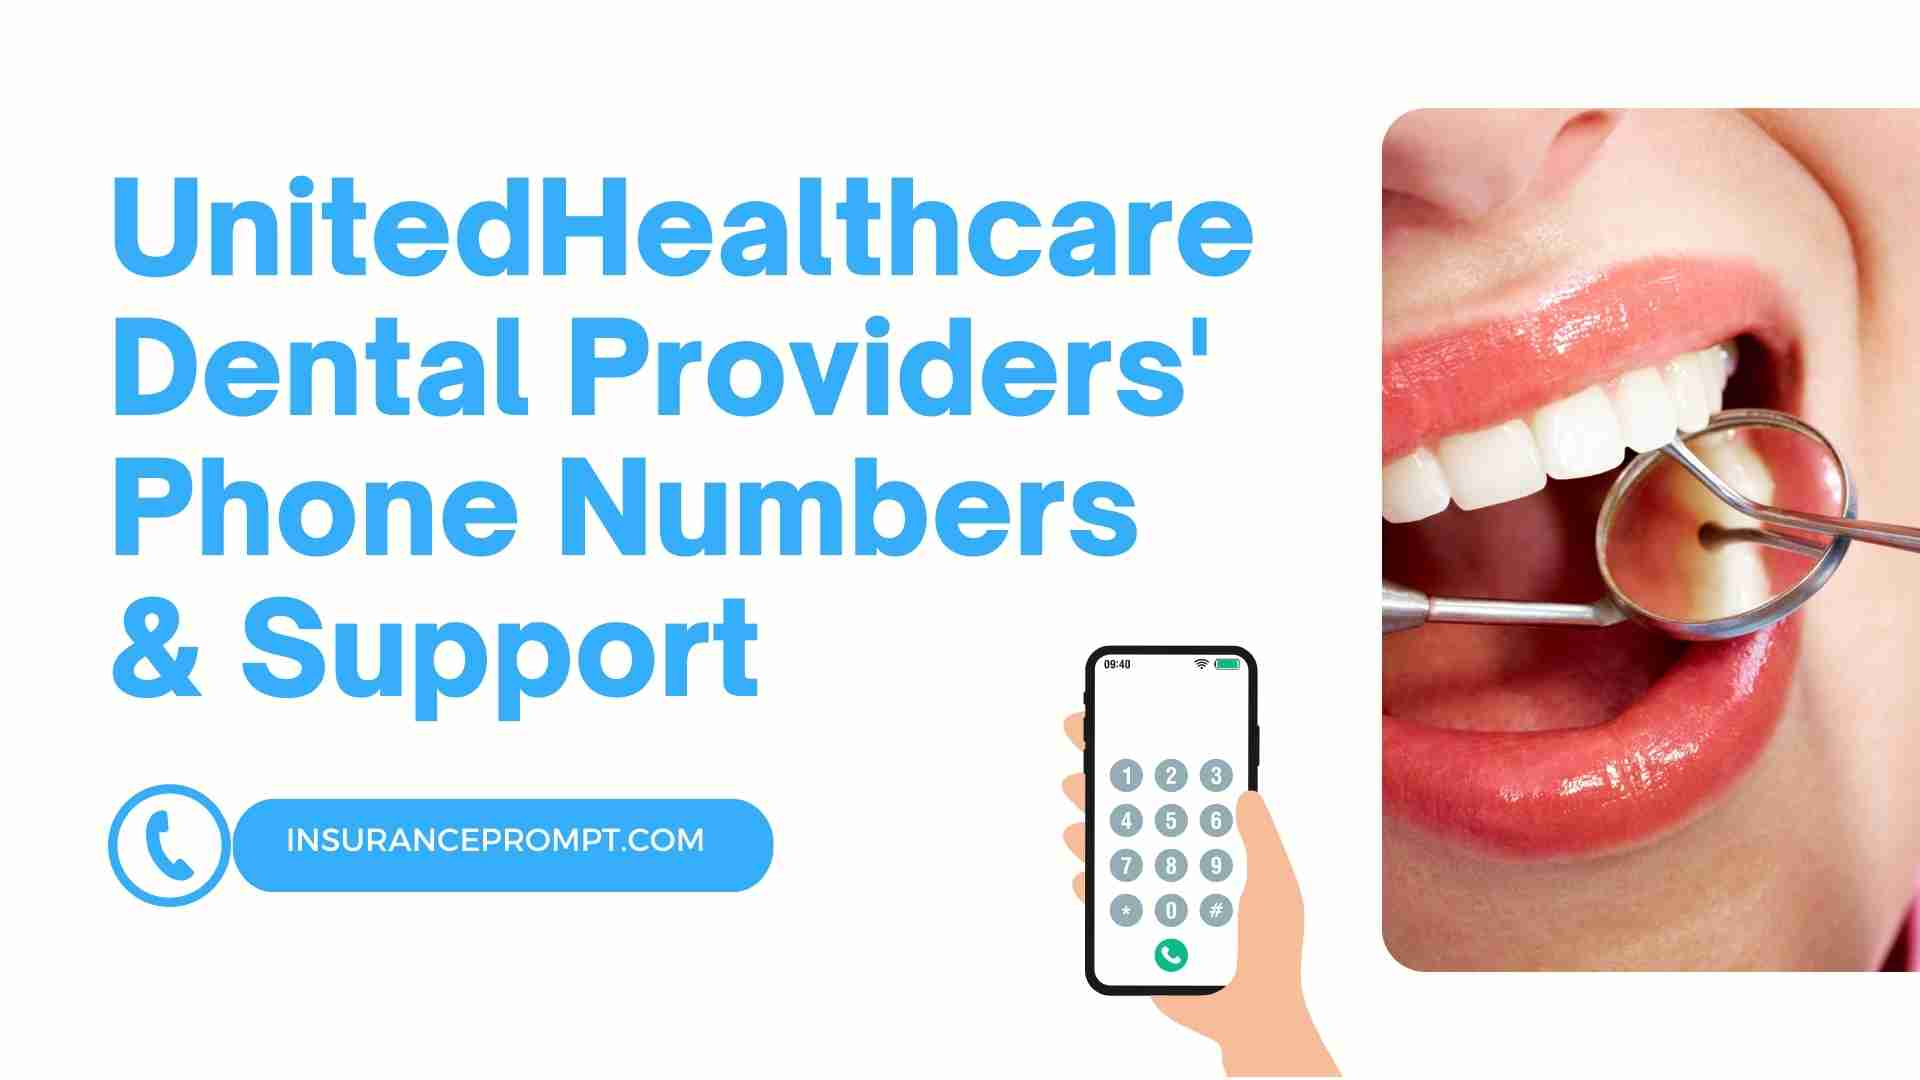 UnitedHealthcare Dental Providers’ Phone Numbers & Support